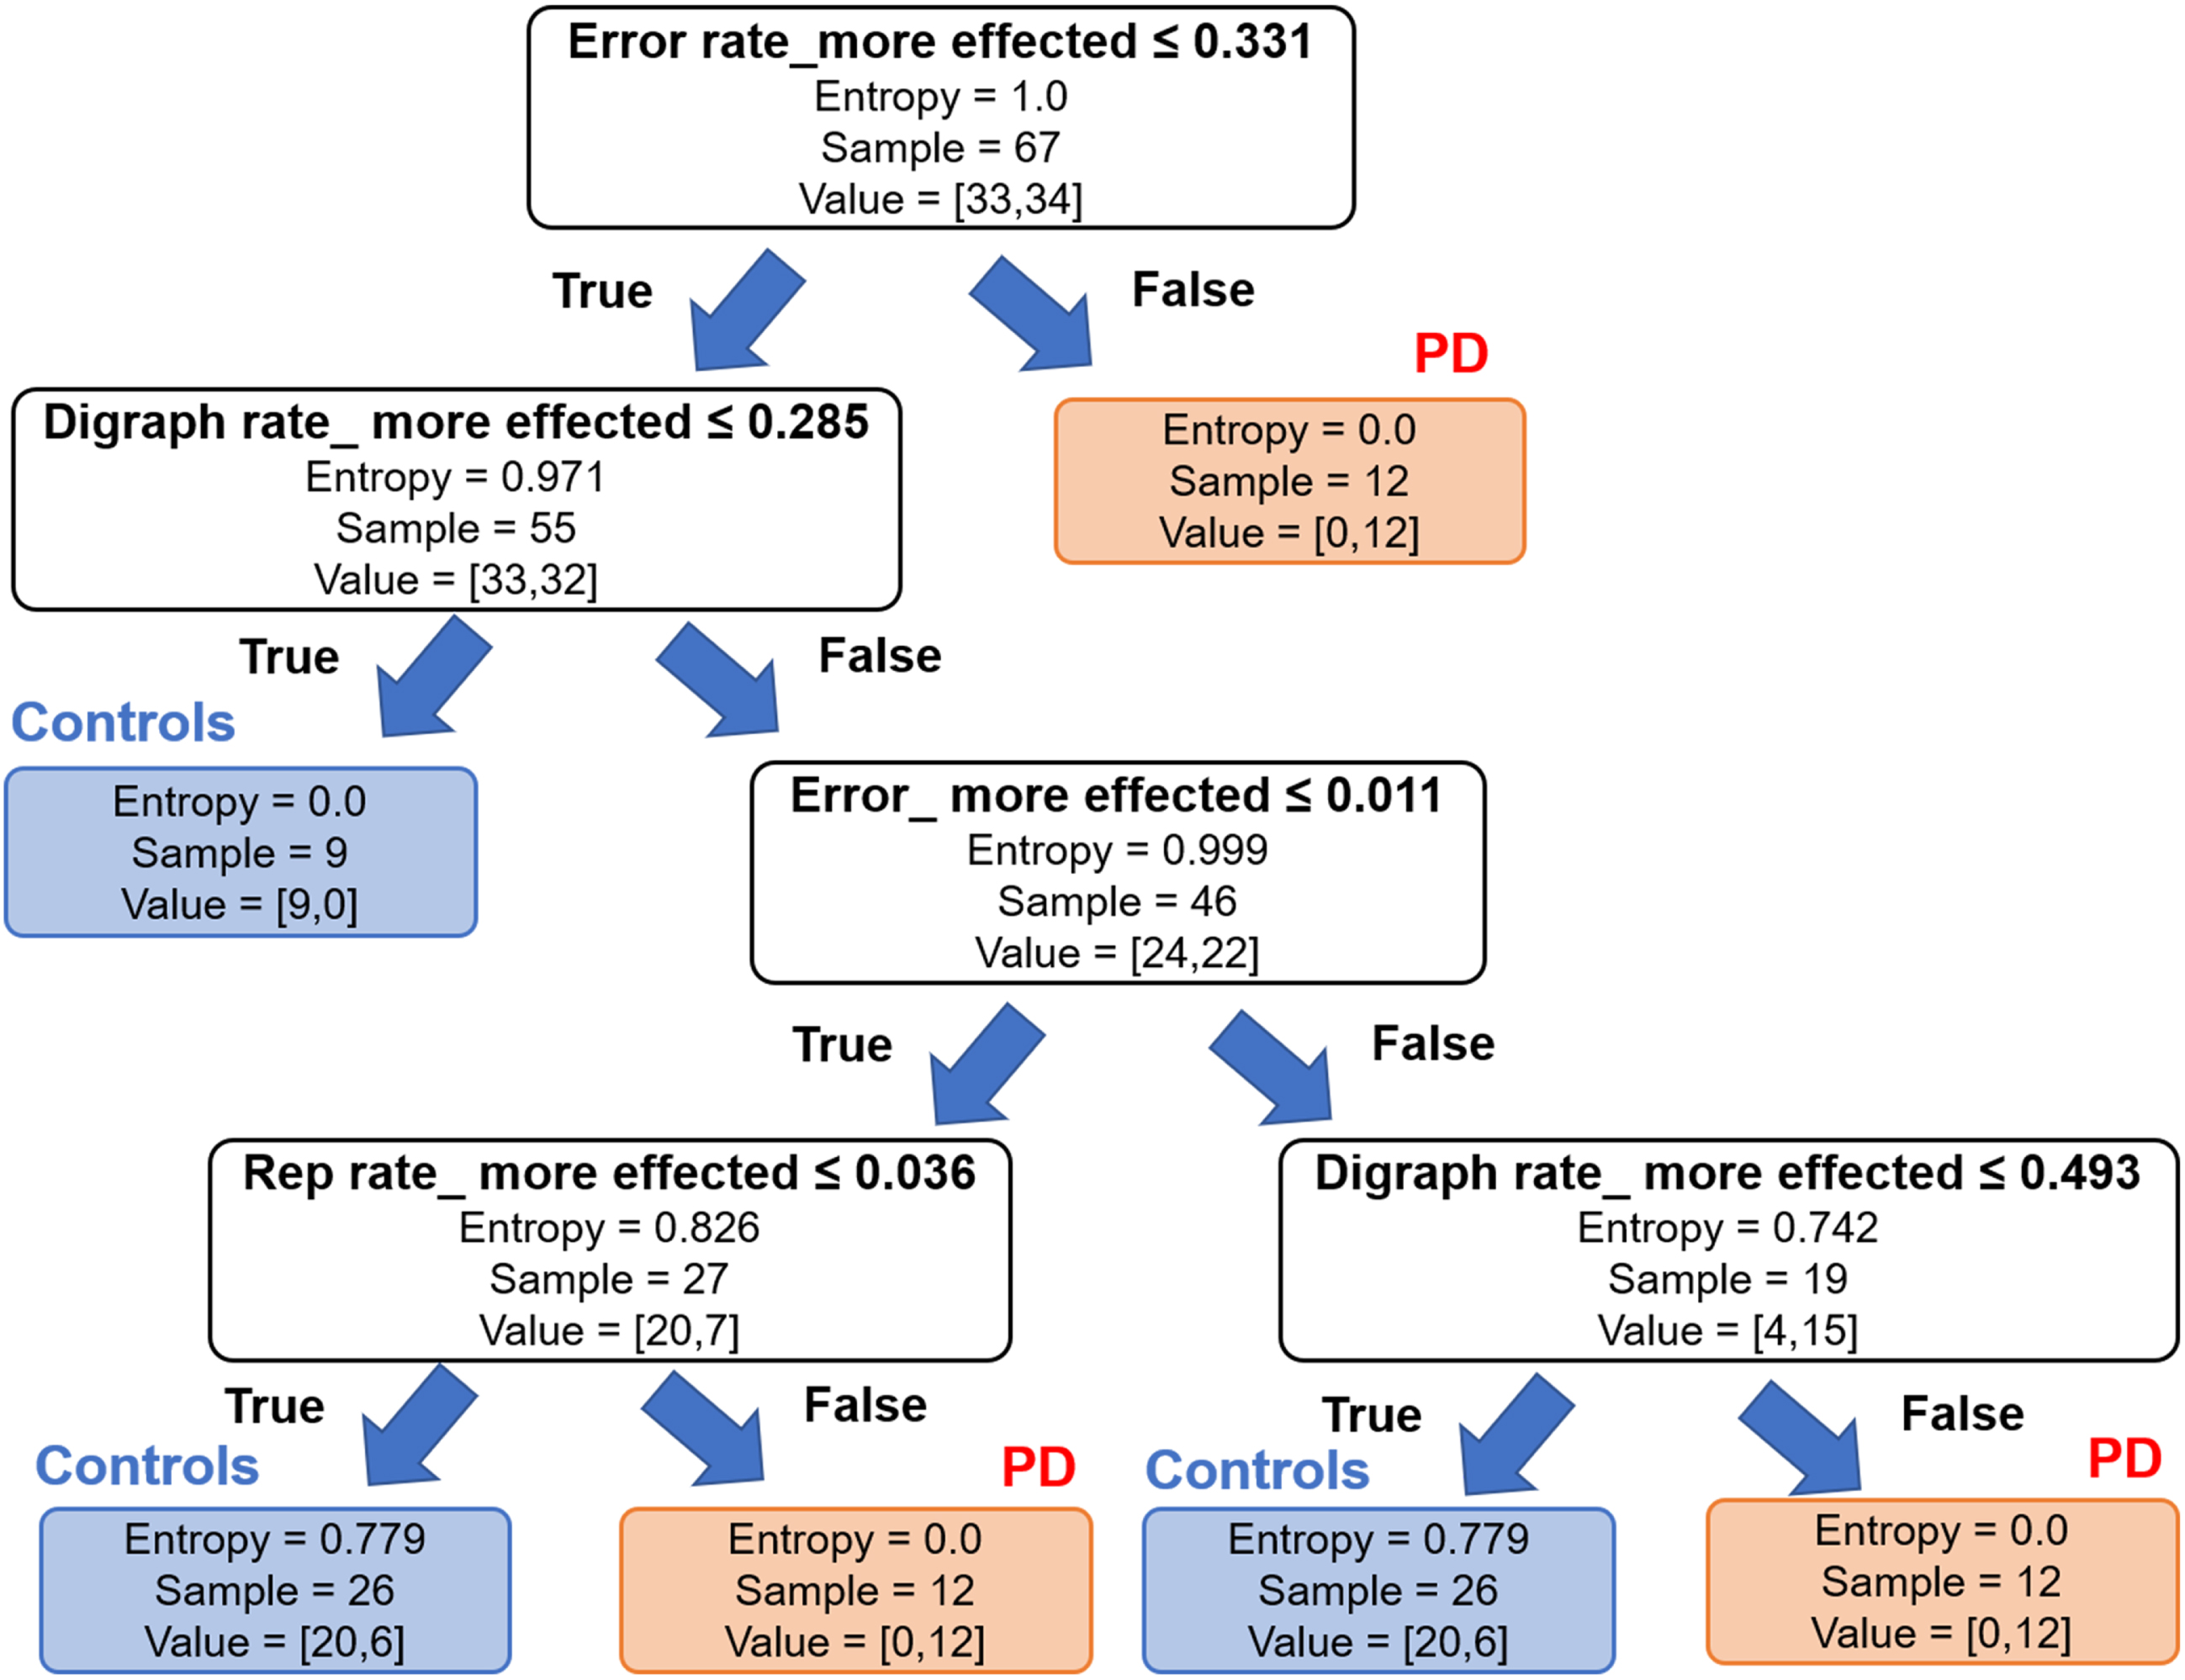 Machine learning based approach with decision tree method using accumulative error, error rate, repetition rate and changing rate of keystroke duration or digraph rate to distinguish between Parkinson’s disease (PD) and controls with highest accuracy. Entropy is a measure of disorders or unpredictability in the system of the decision trees method. Lower entropy of the typing parameters including accumulative error, error rate, and repetition rate, but not digraph rate, would suggest higher information gain or the PD category.